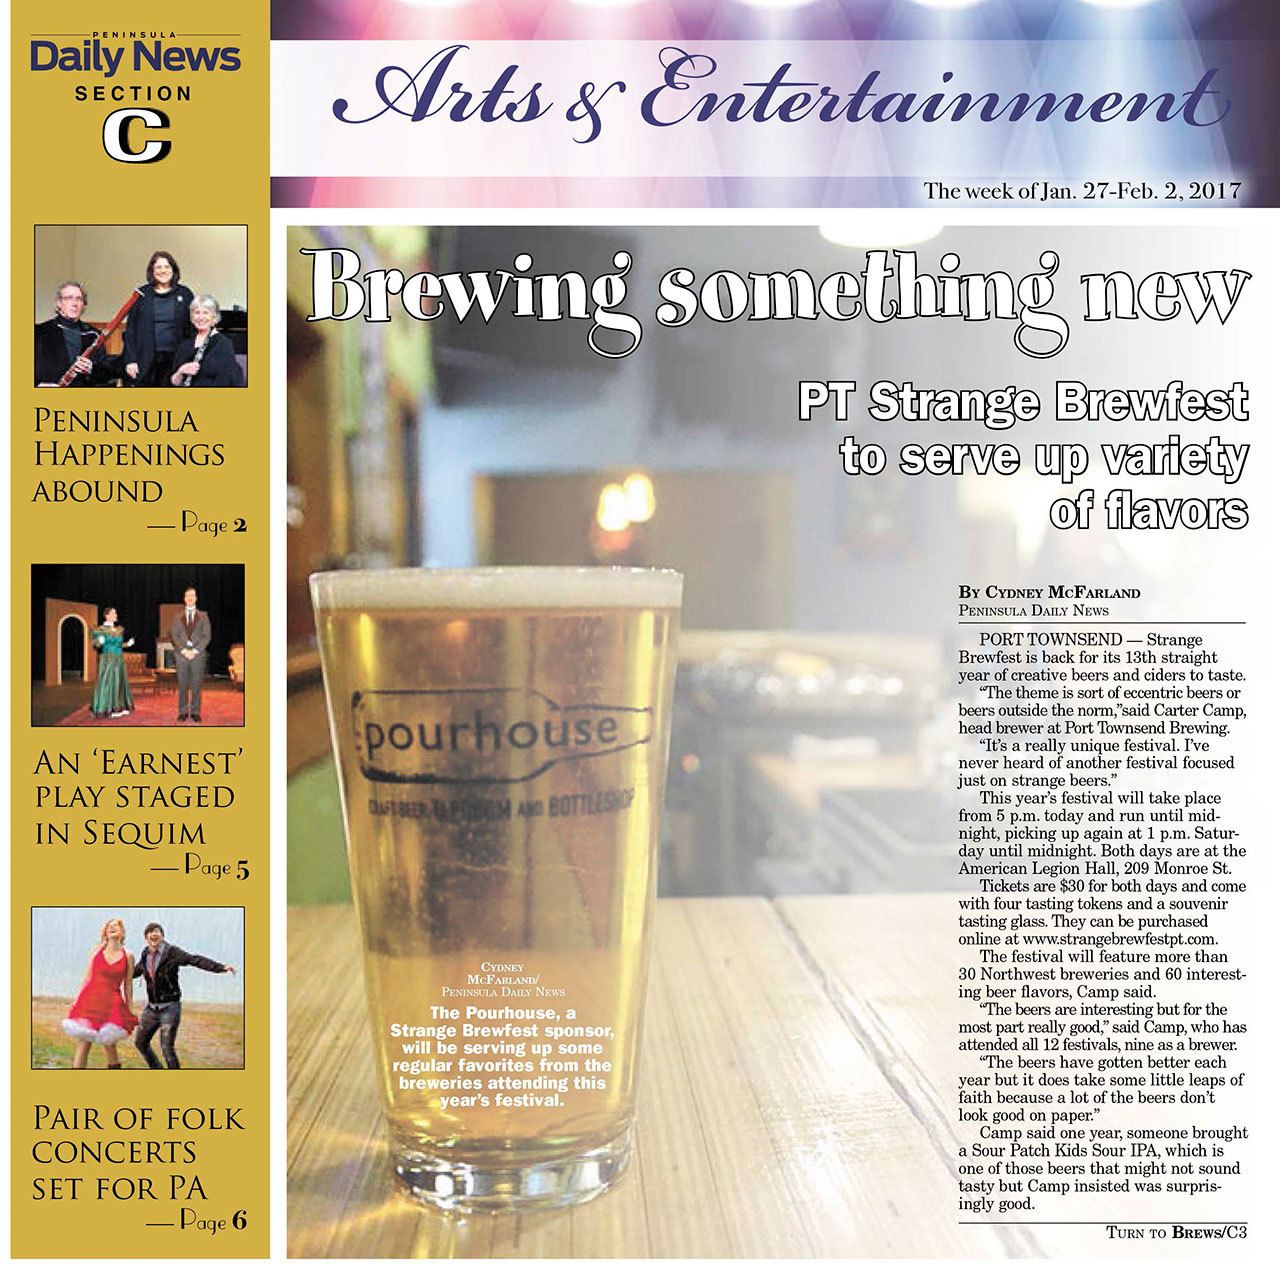 You spoke, we listened: Peninsula Daily News rolls out new Arts & Entertainment section